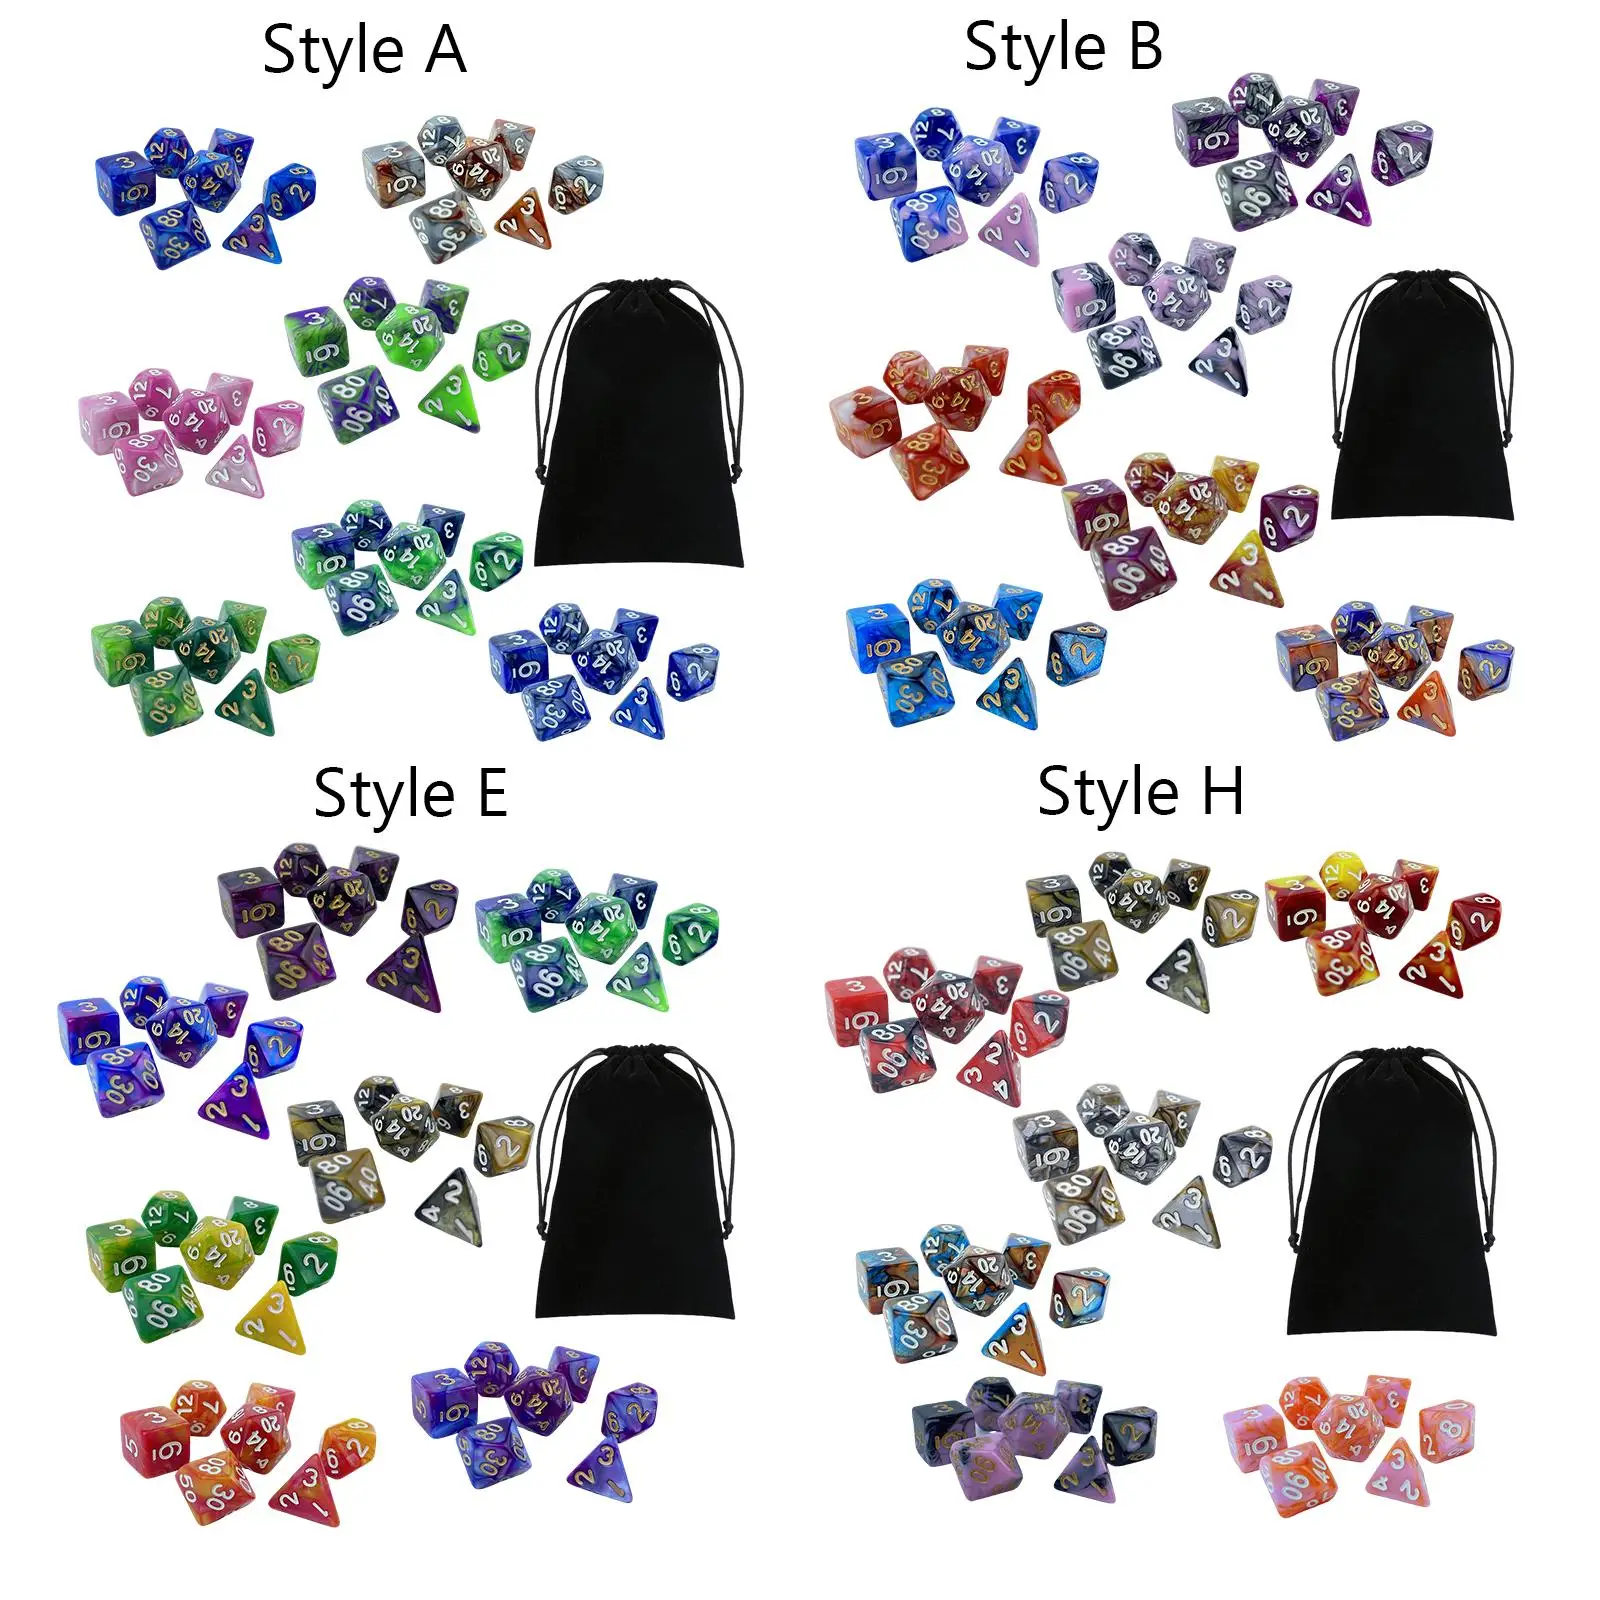 49 Pieces Engraved Polyhedral Dices Set for Roll Playing Games KTV Parties